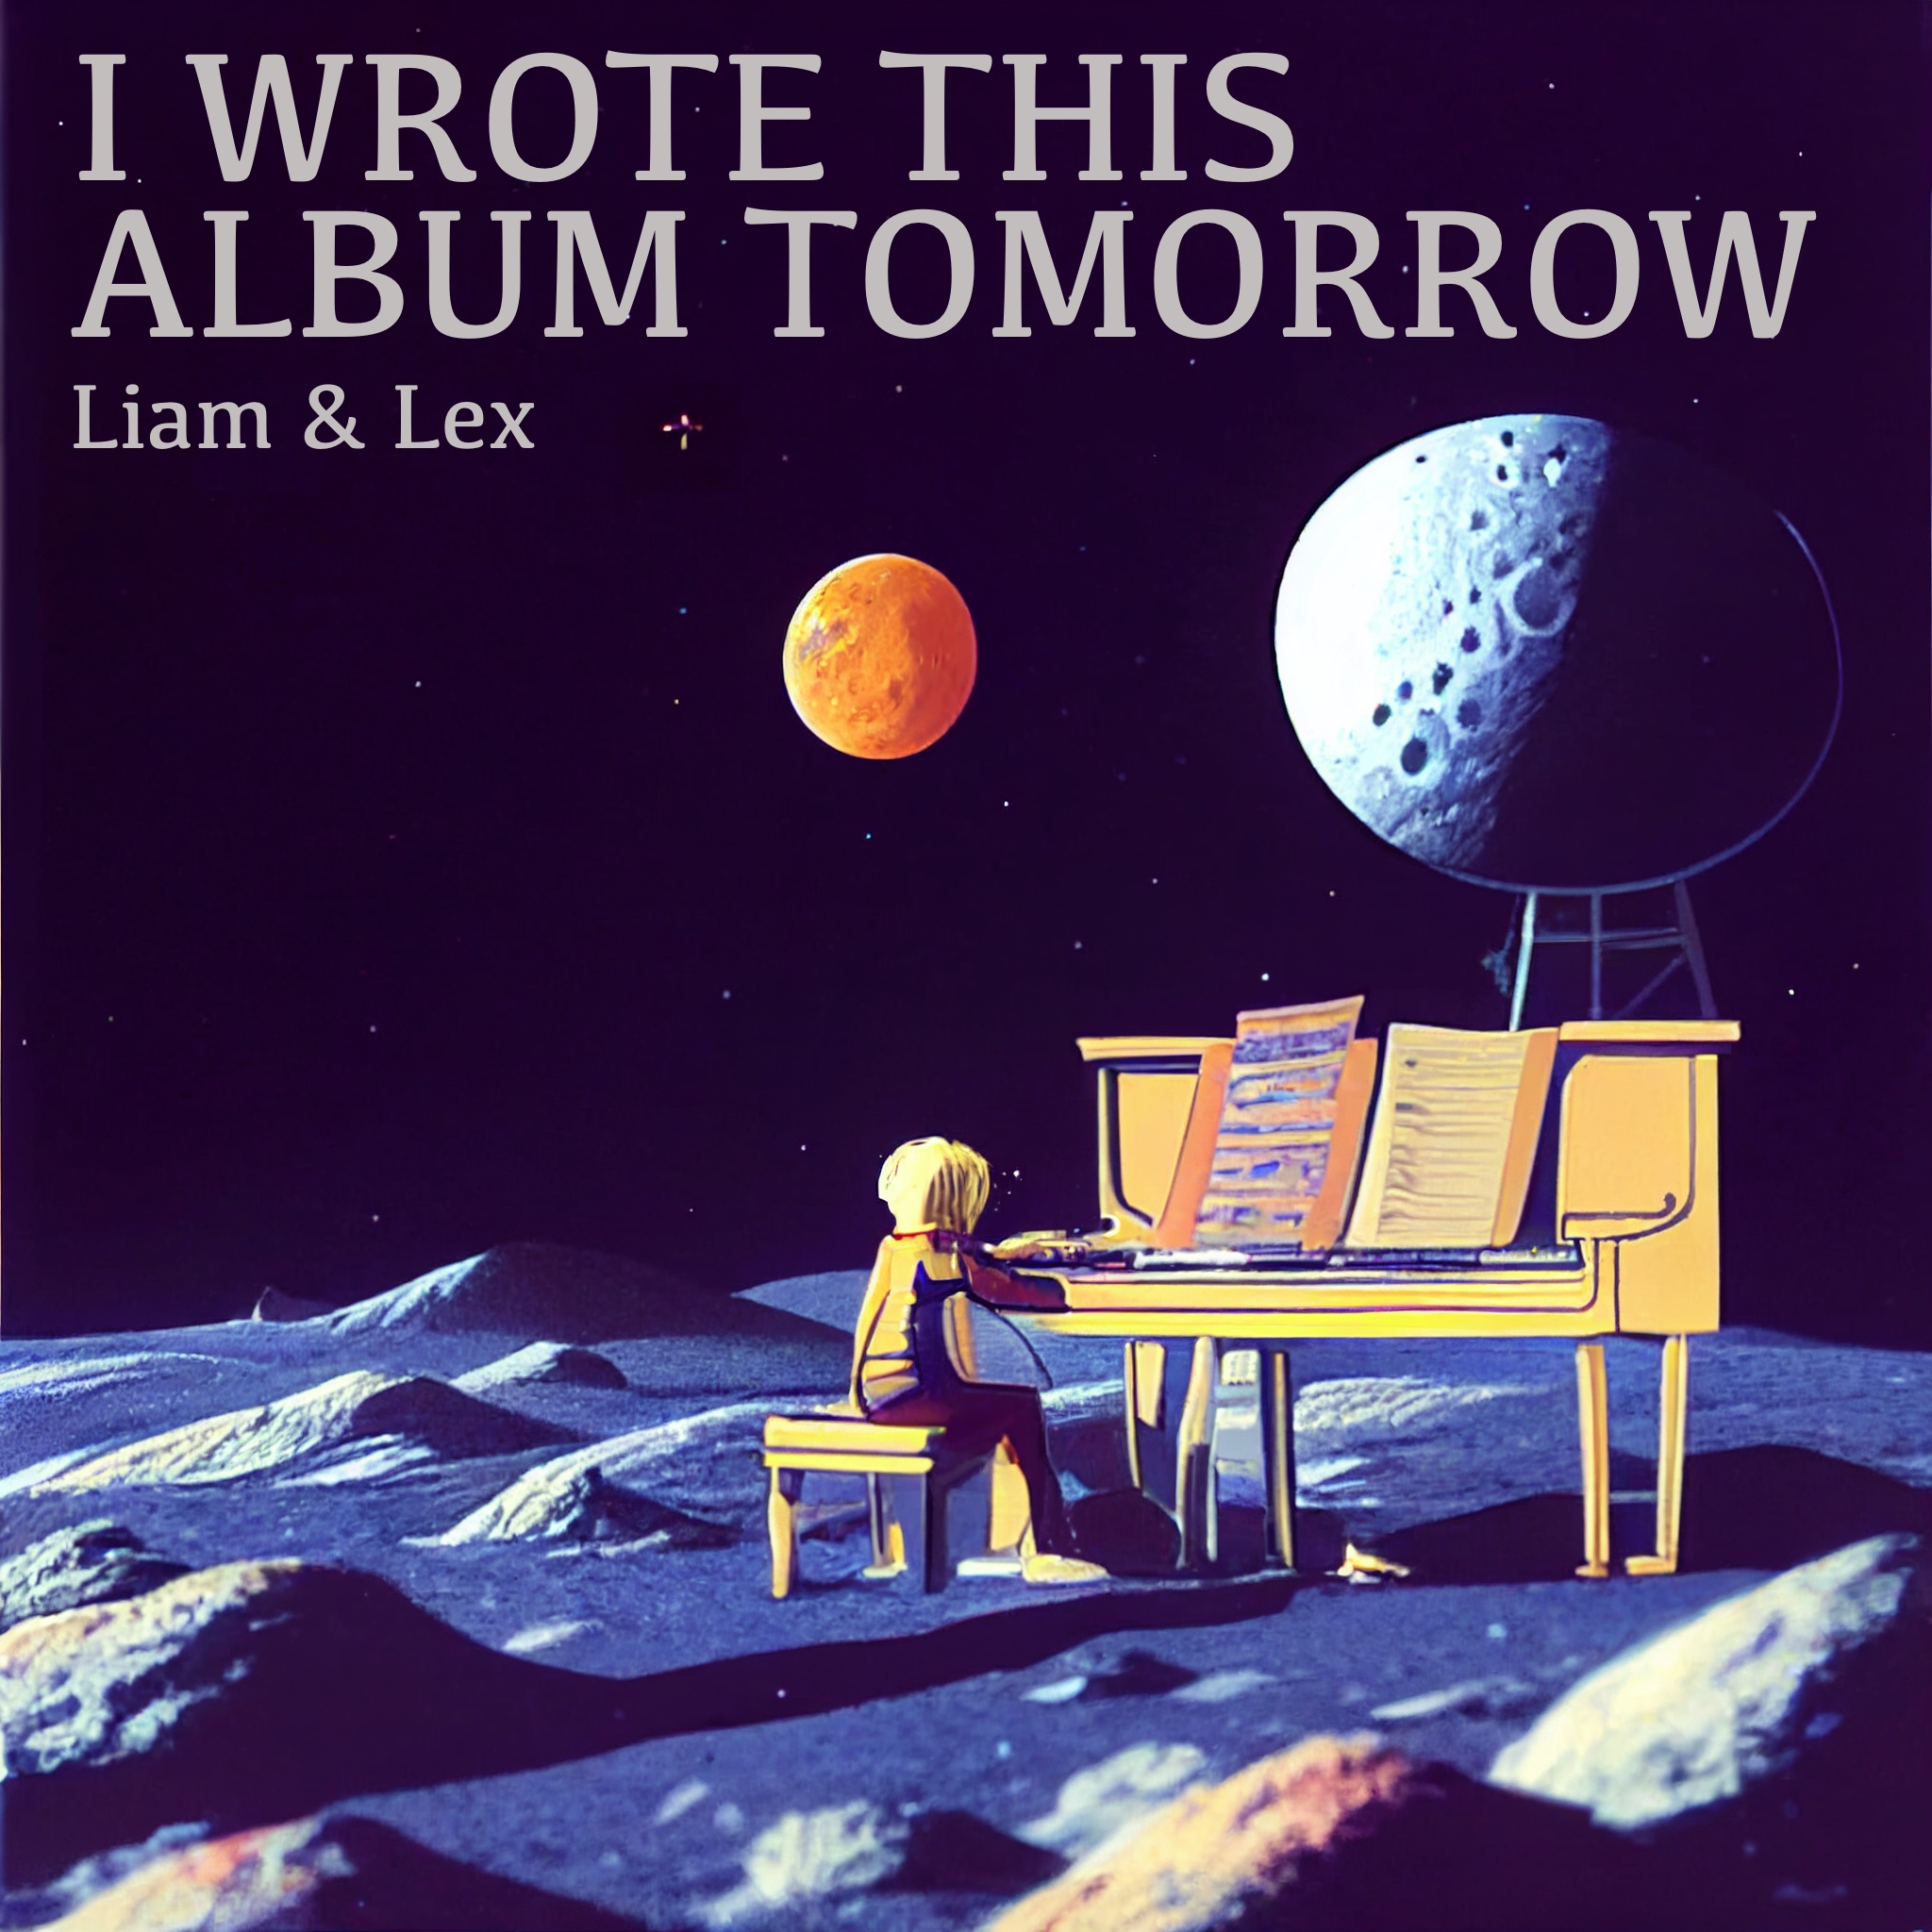 I Wrote This Album Tomorrow album cover: Blonde haired boy playing piano on the moon